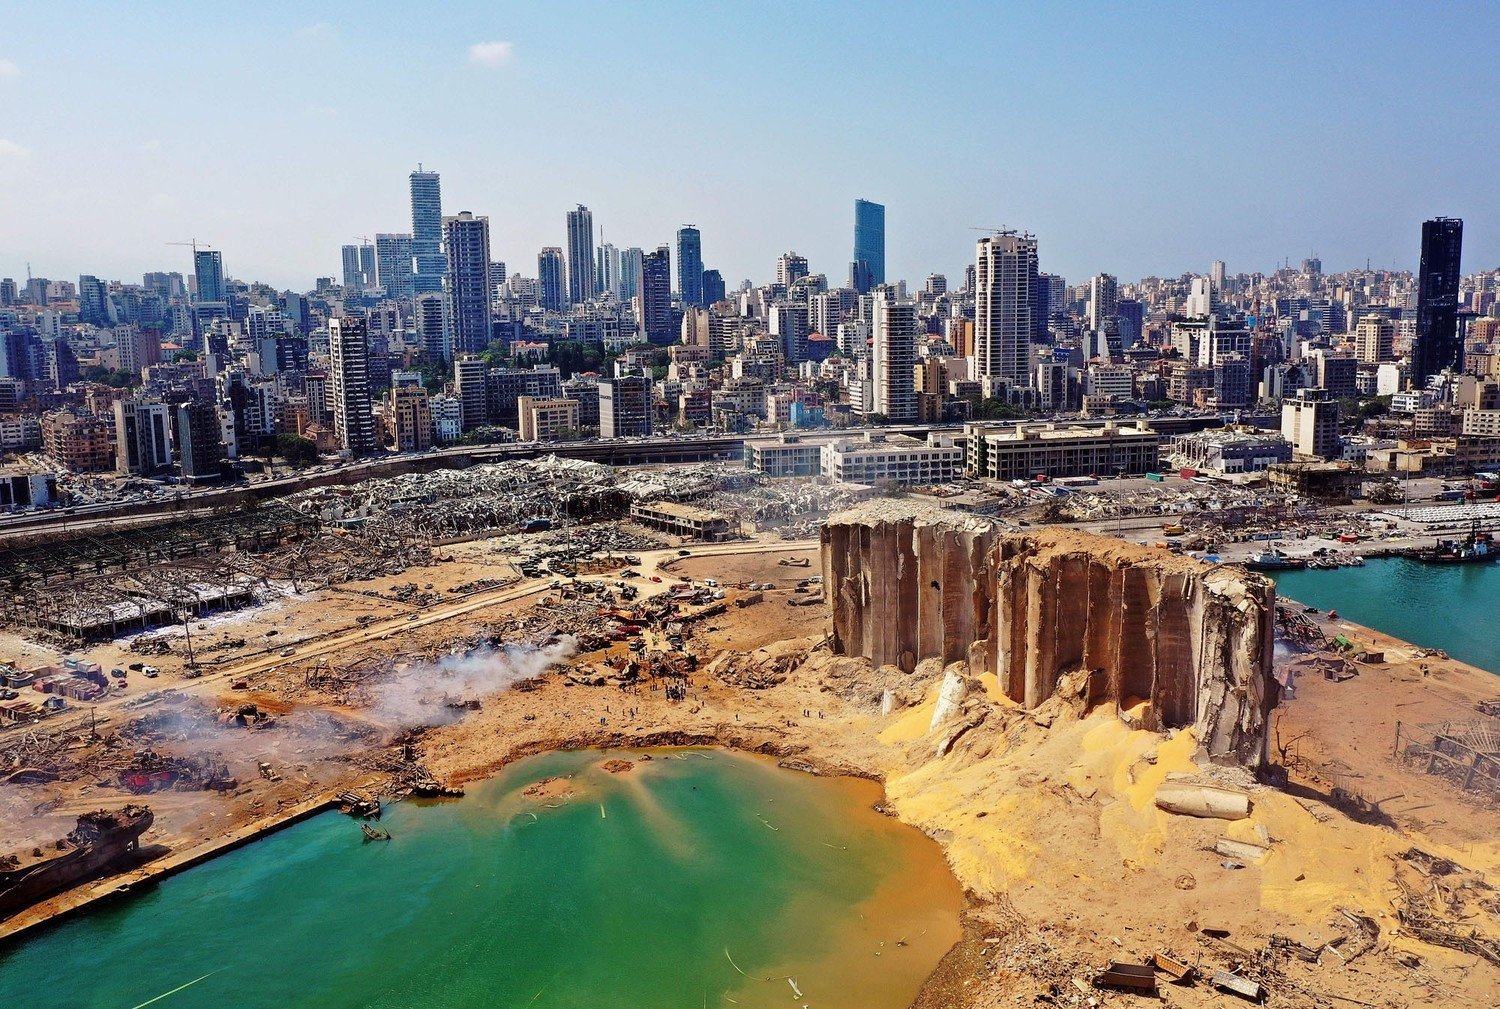 An aerial view shows the massive damage at Beirut port's grain silos (C) and the area around it on Aug. 5, 2020, one day after a massive explosion hit the harbor in the heart of the Lebanese capital. (AFP Photo)